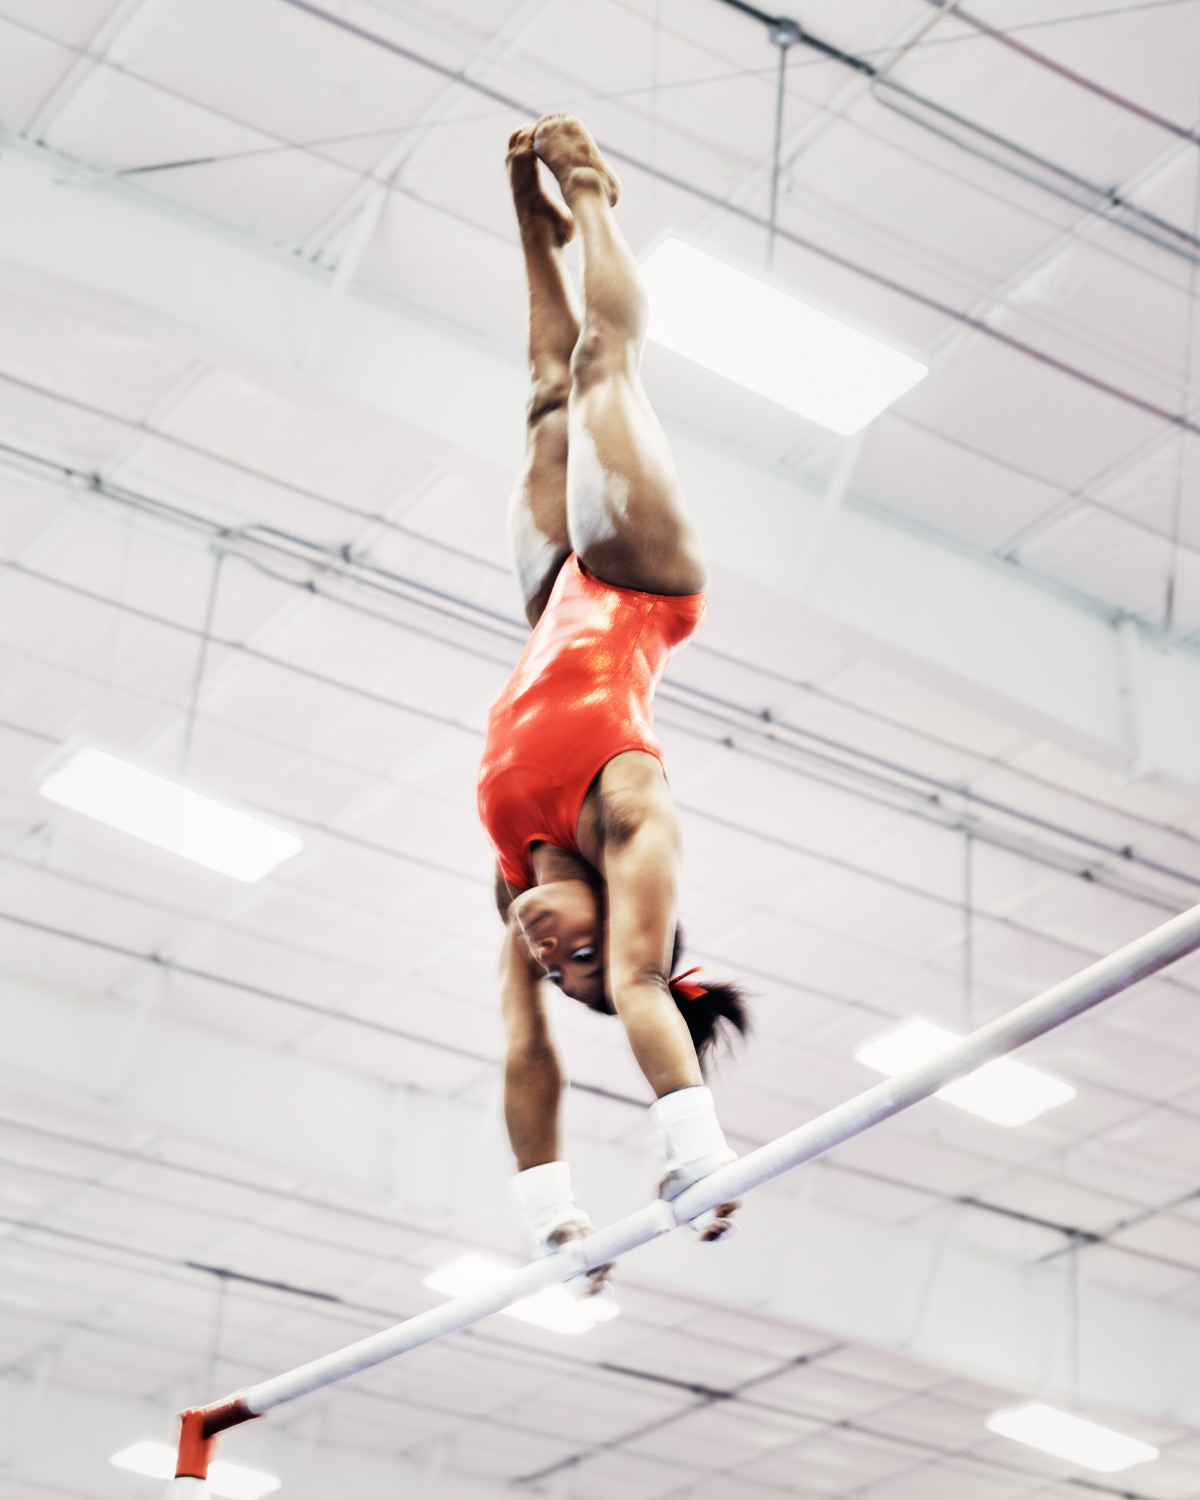 Gold Medal favorite Simone Biles practices gymnastics at her family’s World Champions Centre in Spring, TX on Thurs July 14, 2016. Biles competes in the Women’s team final on August 9, and the Women’s all-around individual final on August 11.